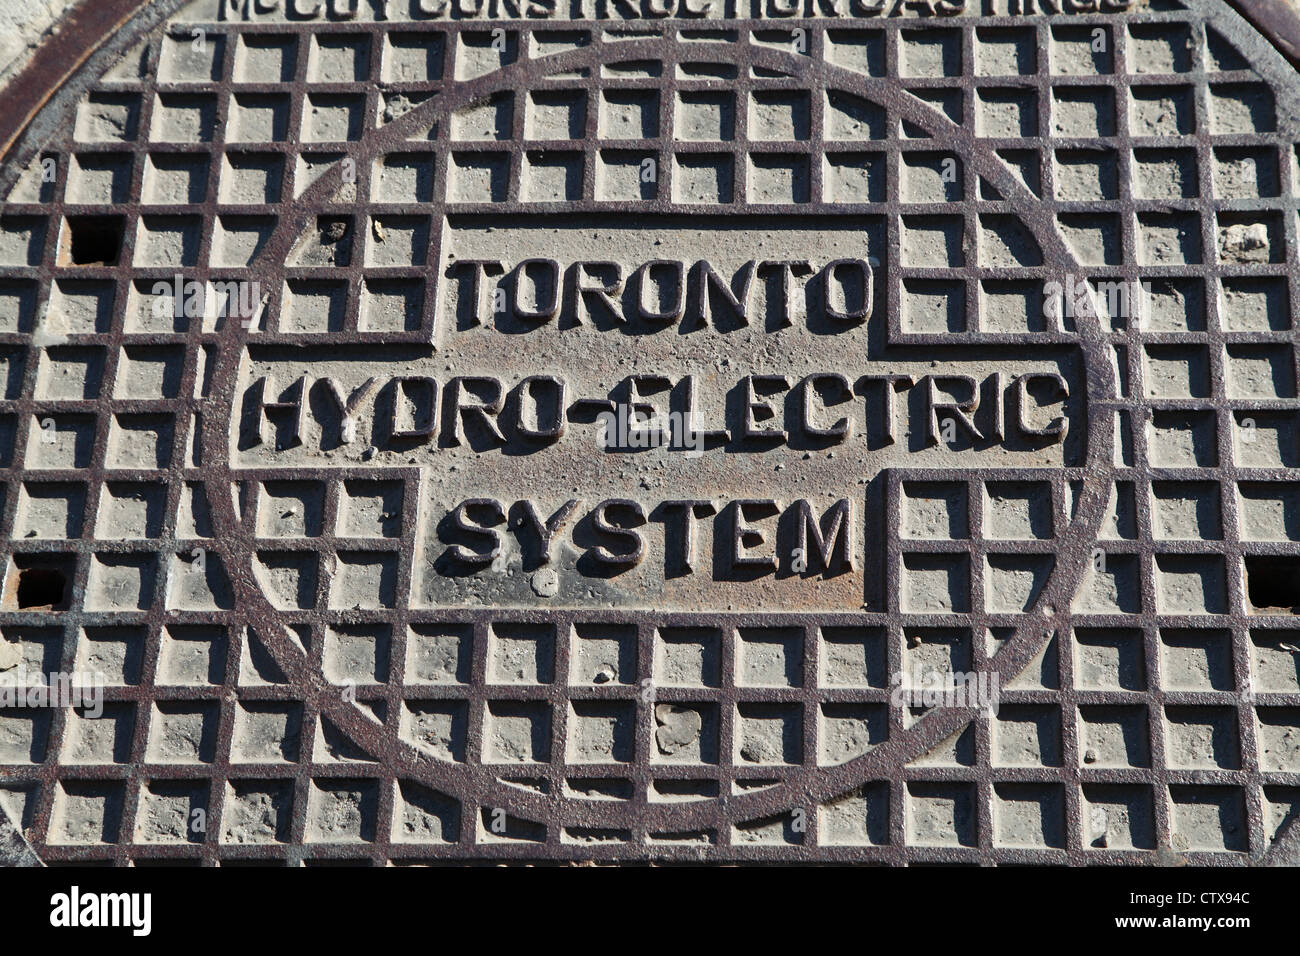 Toronto Hydro Electric Manhole Cover On The Pavement In Toronto Ctx94c